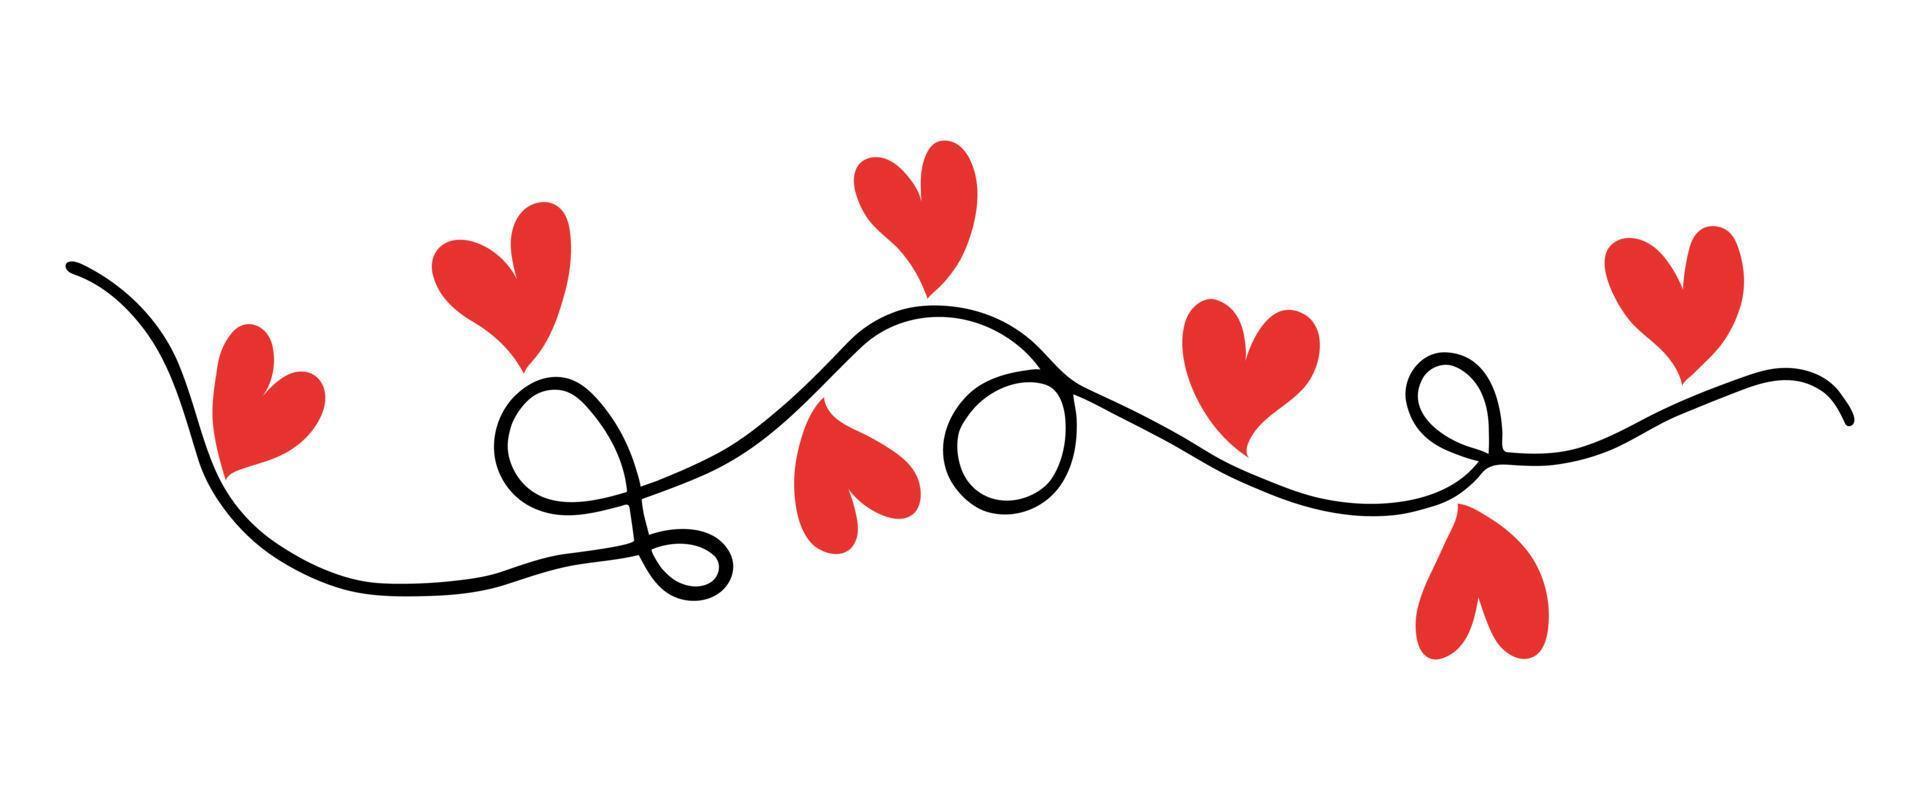 Bright festive garland with red hearts. Simple vector icon. Hand drawn doodle isolated on white. Ribbon with cute flags. Symbol of love, romance, sympathy. Flat clipart for Valentine's Day cards